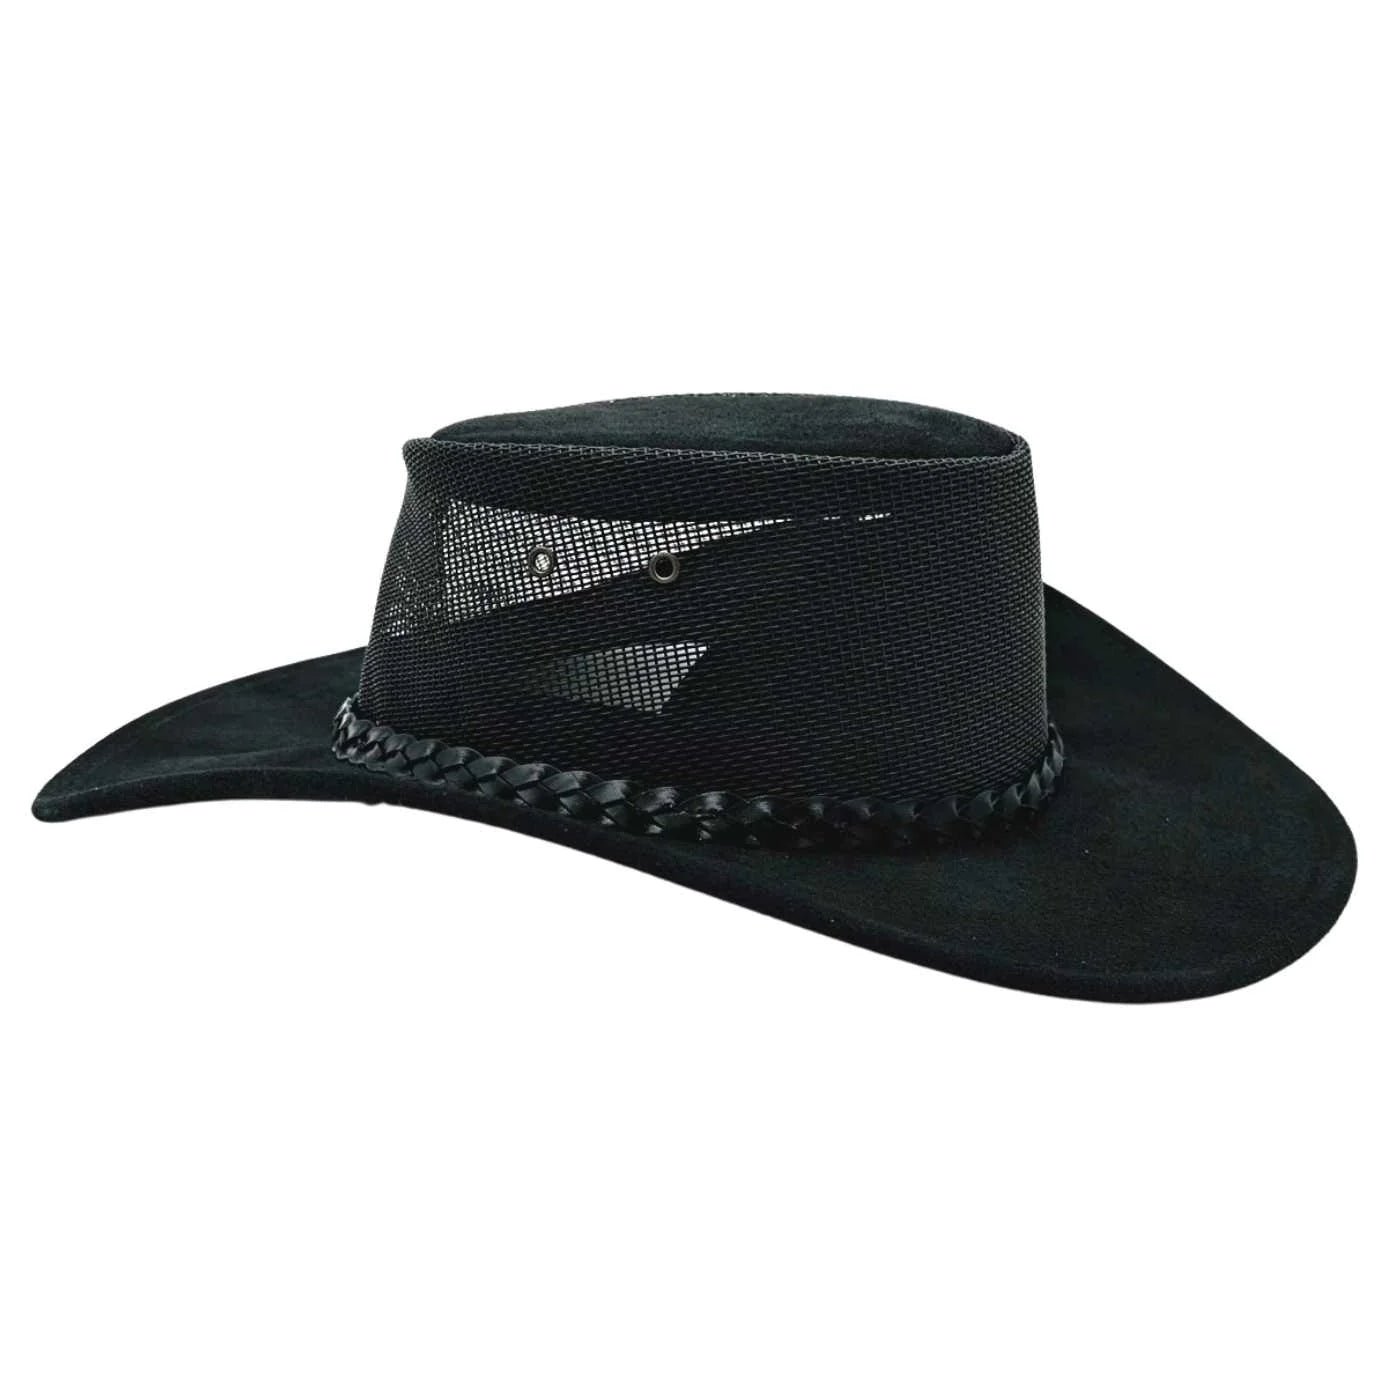 Australian lederhut made of cowhide, including chin band and croced hat band with high UV protection for men's children | brown